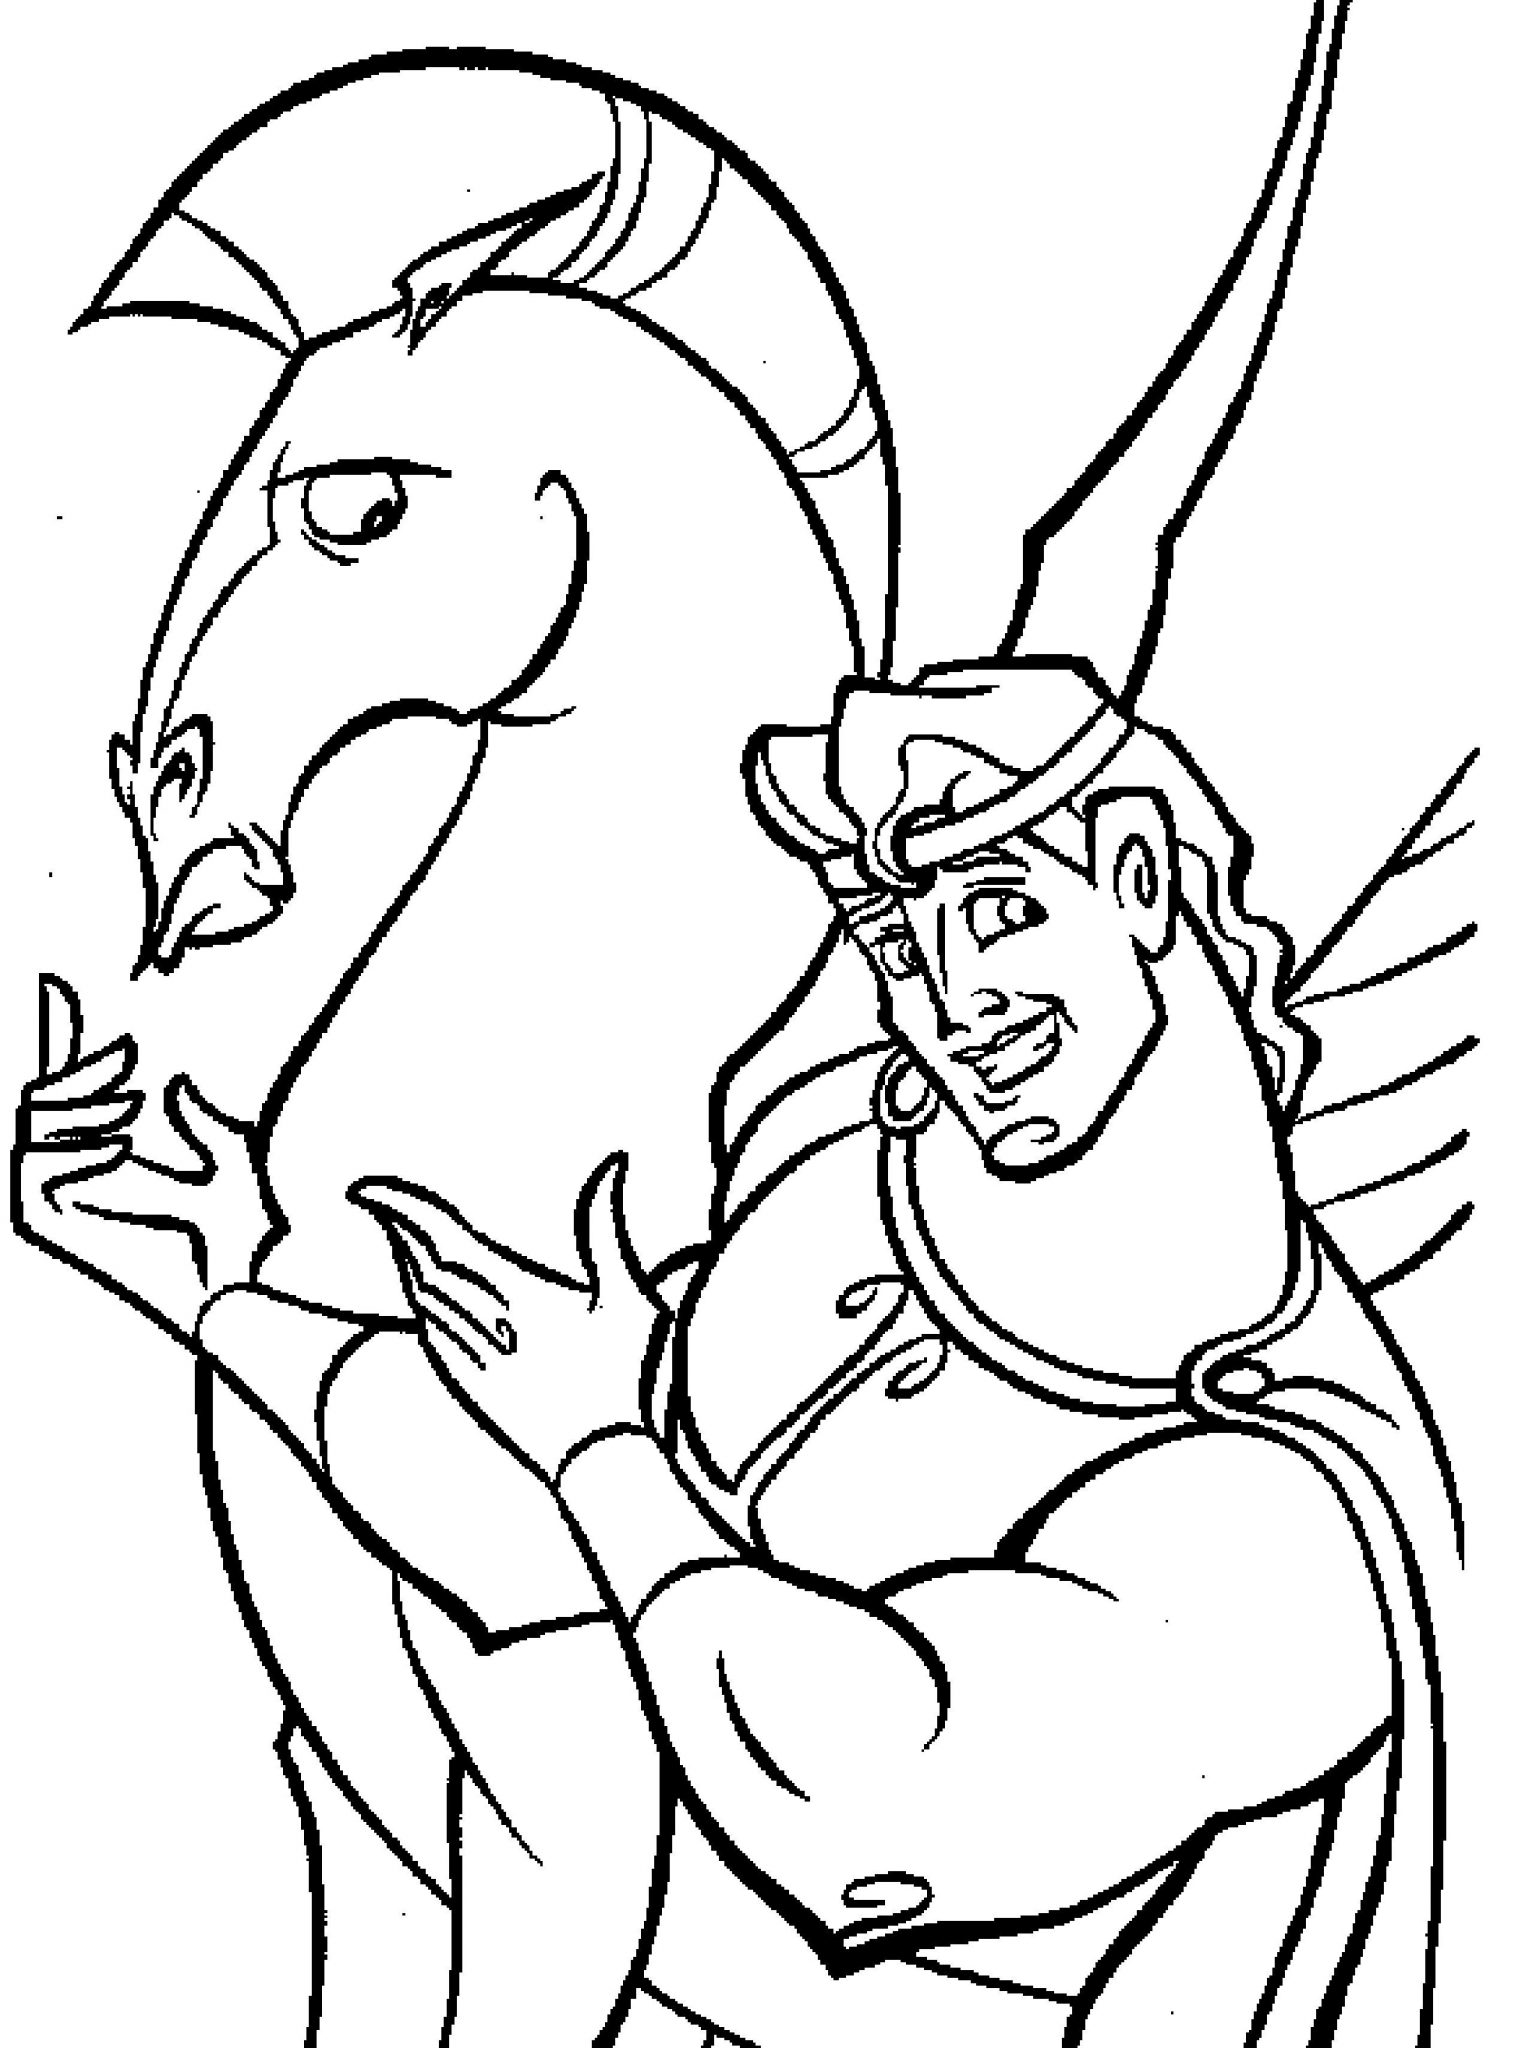 20 Free [Jun 20] Disney Coloring Pages for Kids   Printable